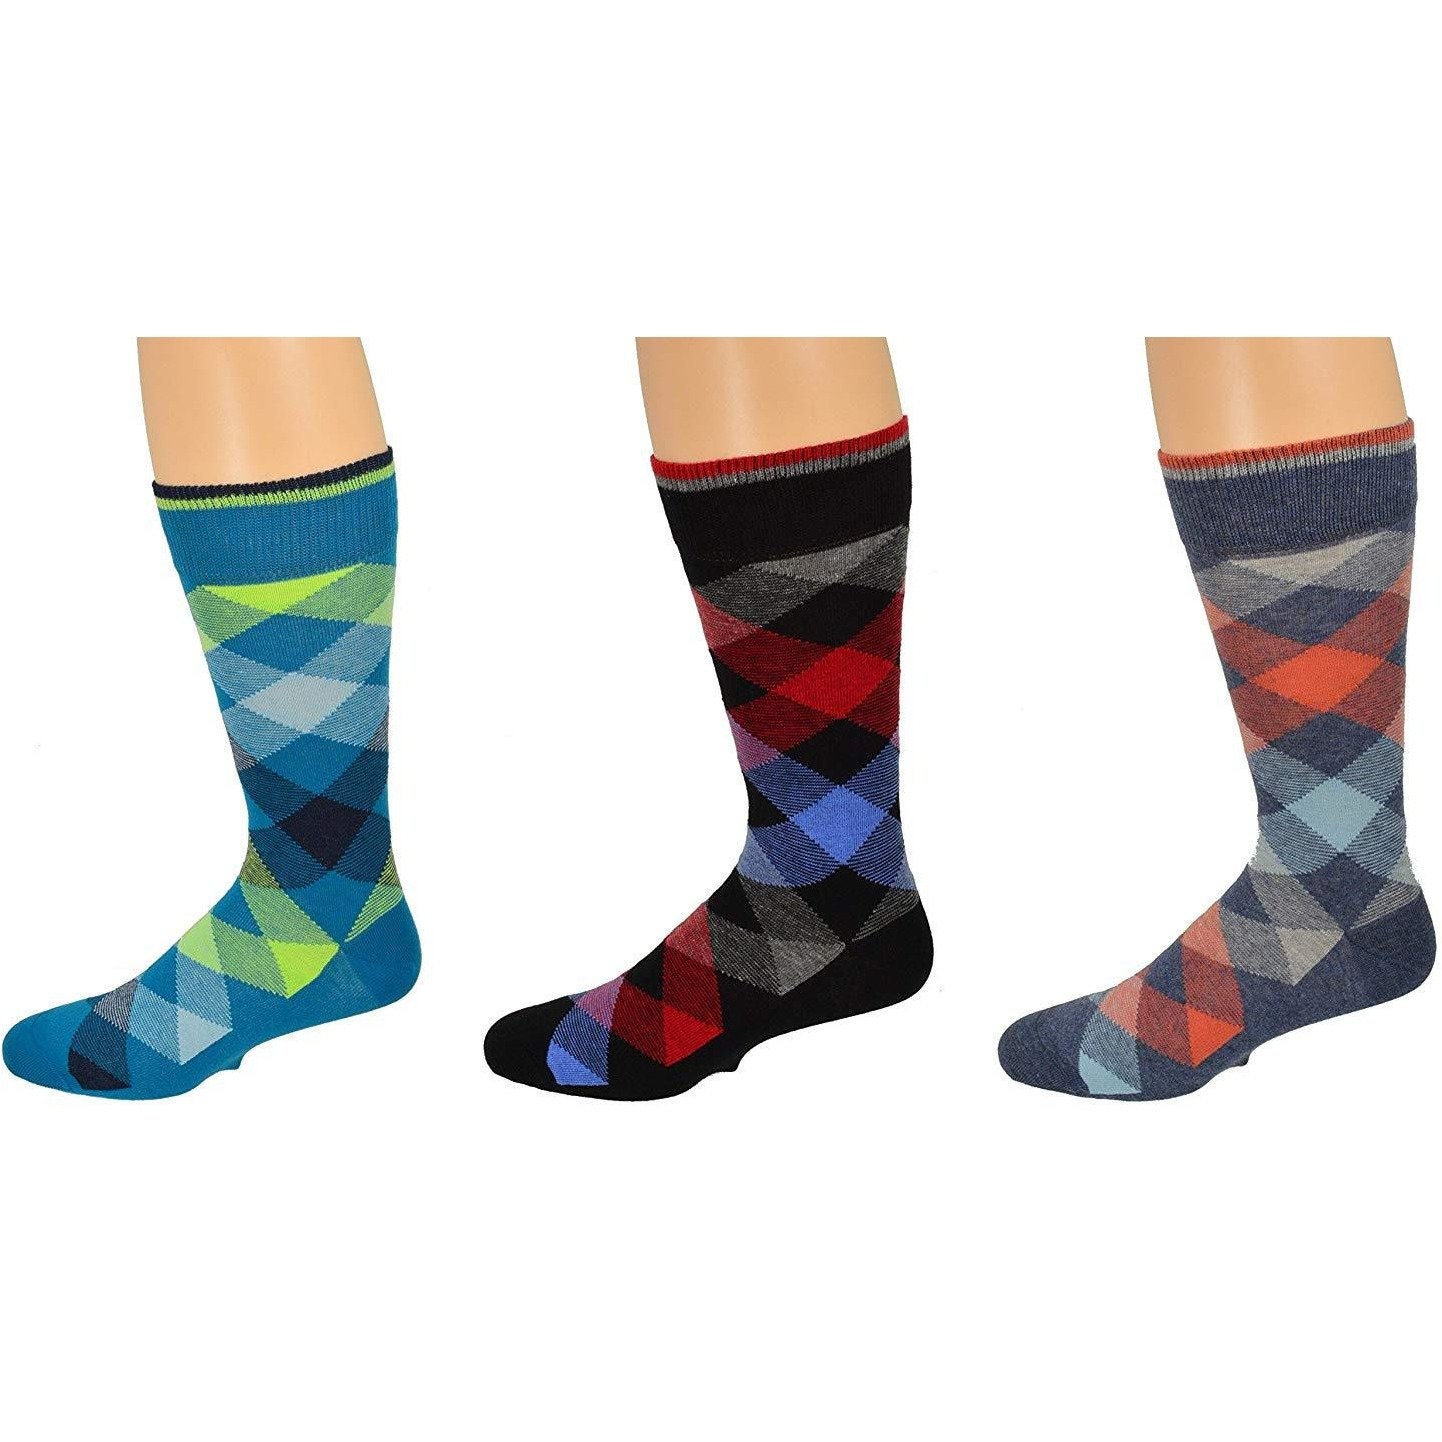 Sierra Socks Men's Casual Cotton Blend Fashion Design Mid Calf Dress Crew Socks, 2 Or 3 Pairs, Colorful/Multicolored For Men